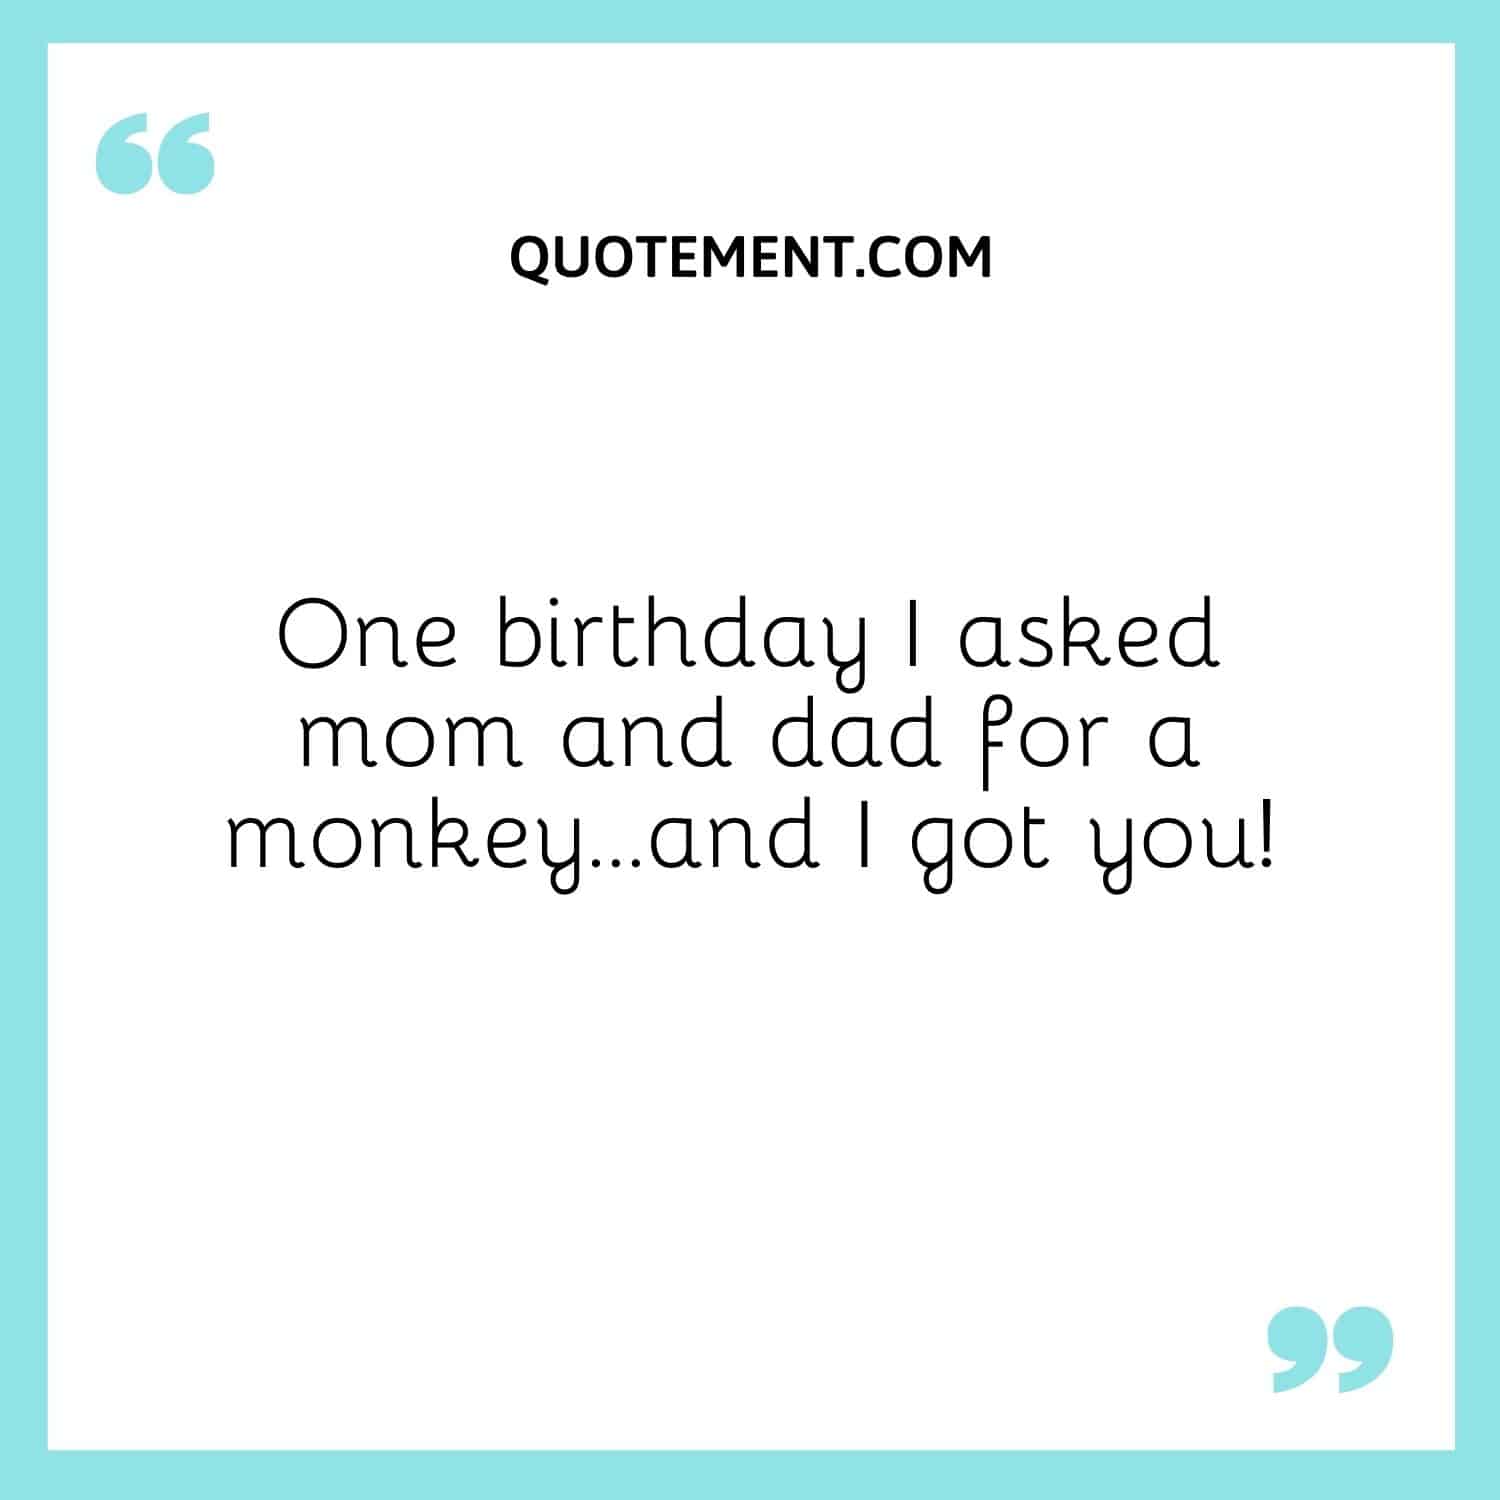 One birthday I asked mom and dad for a monkey…and I got you!